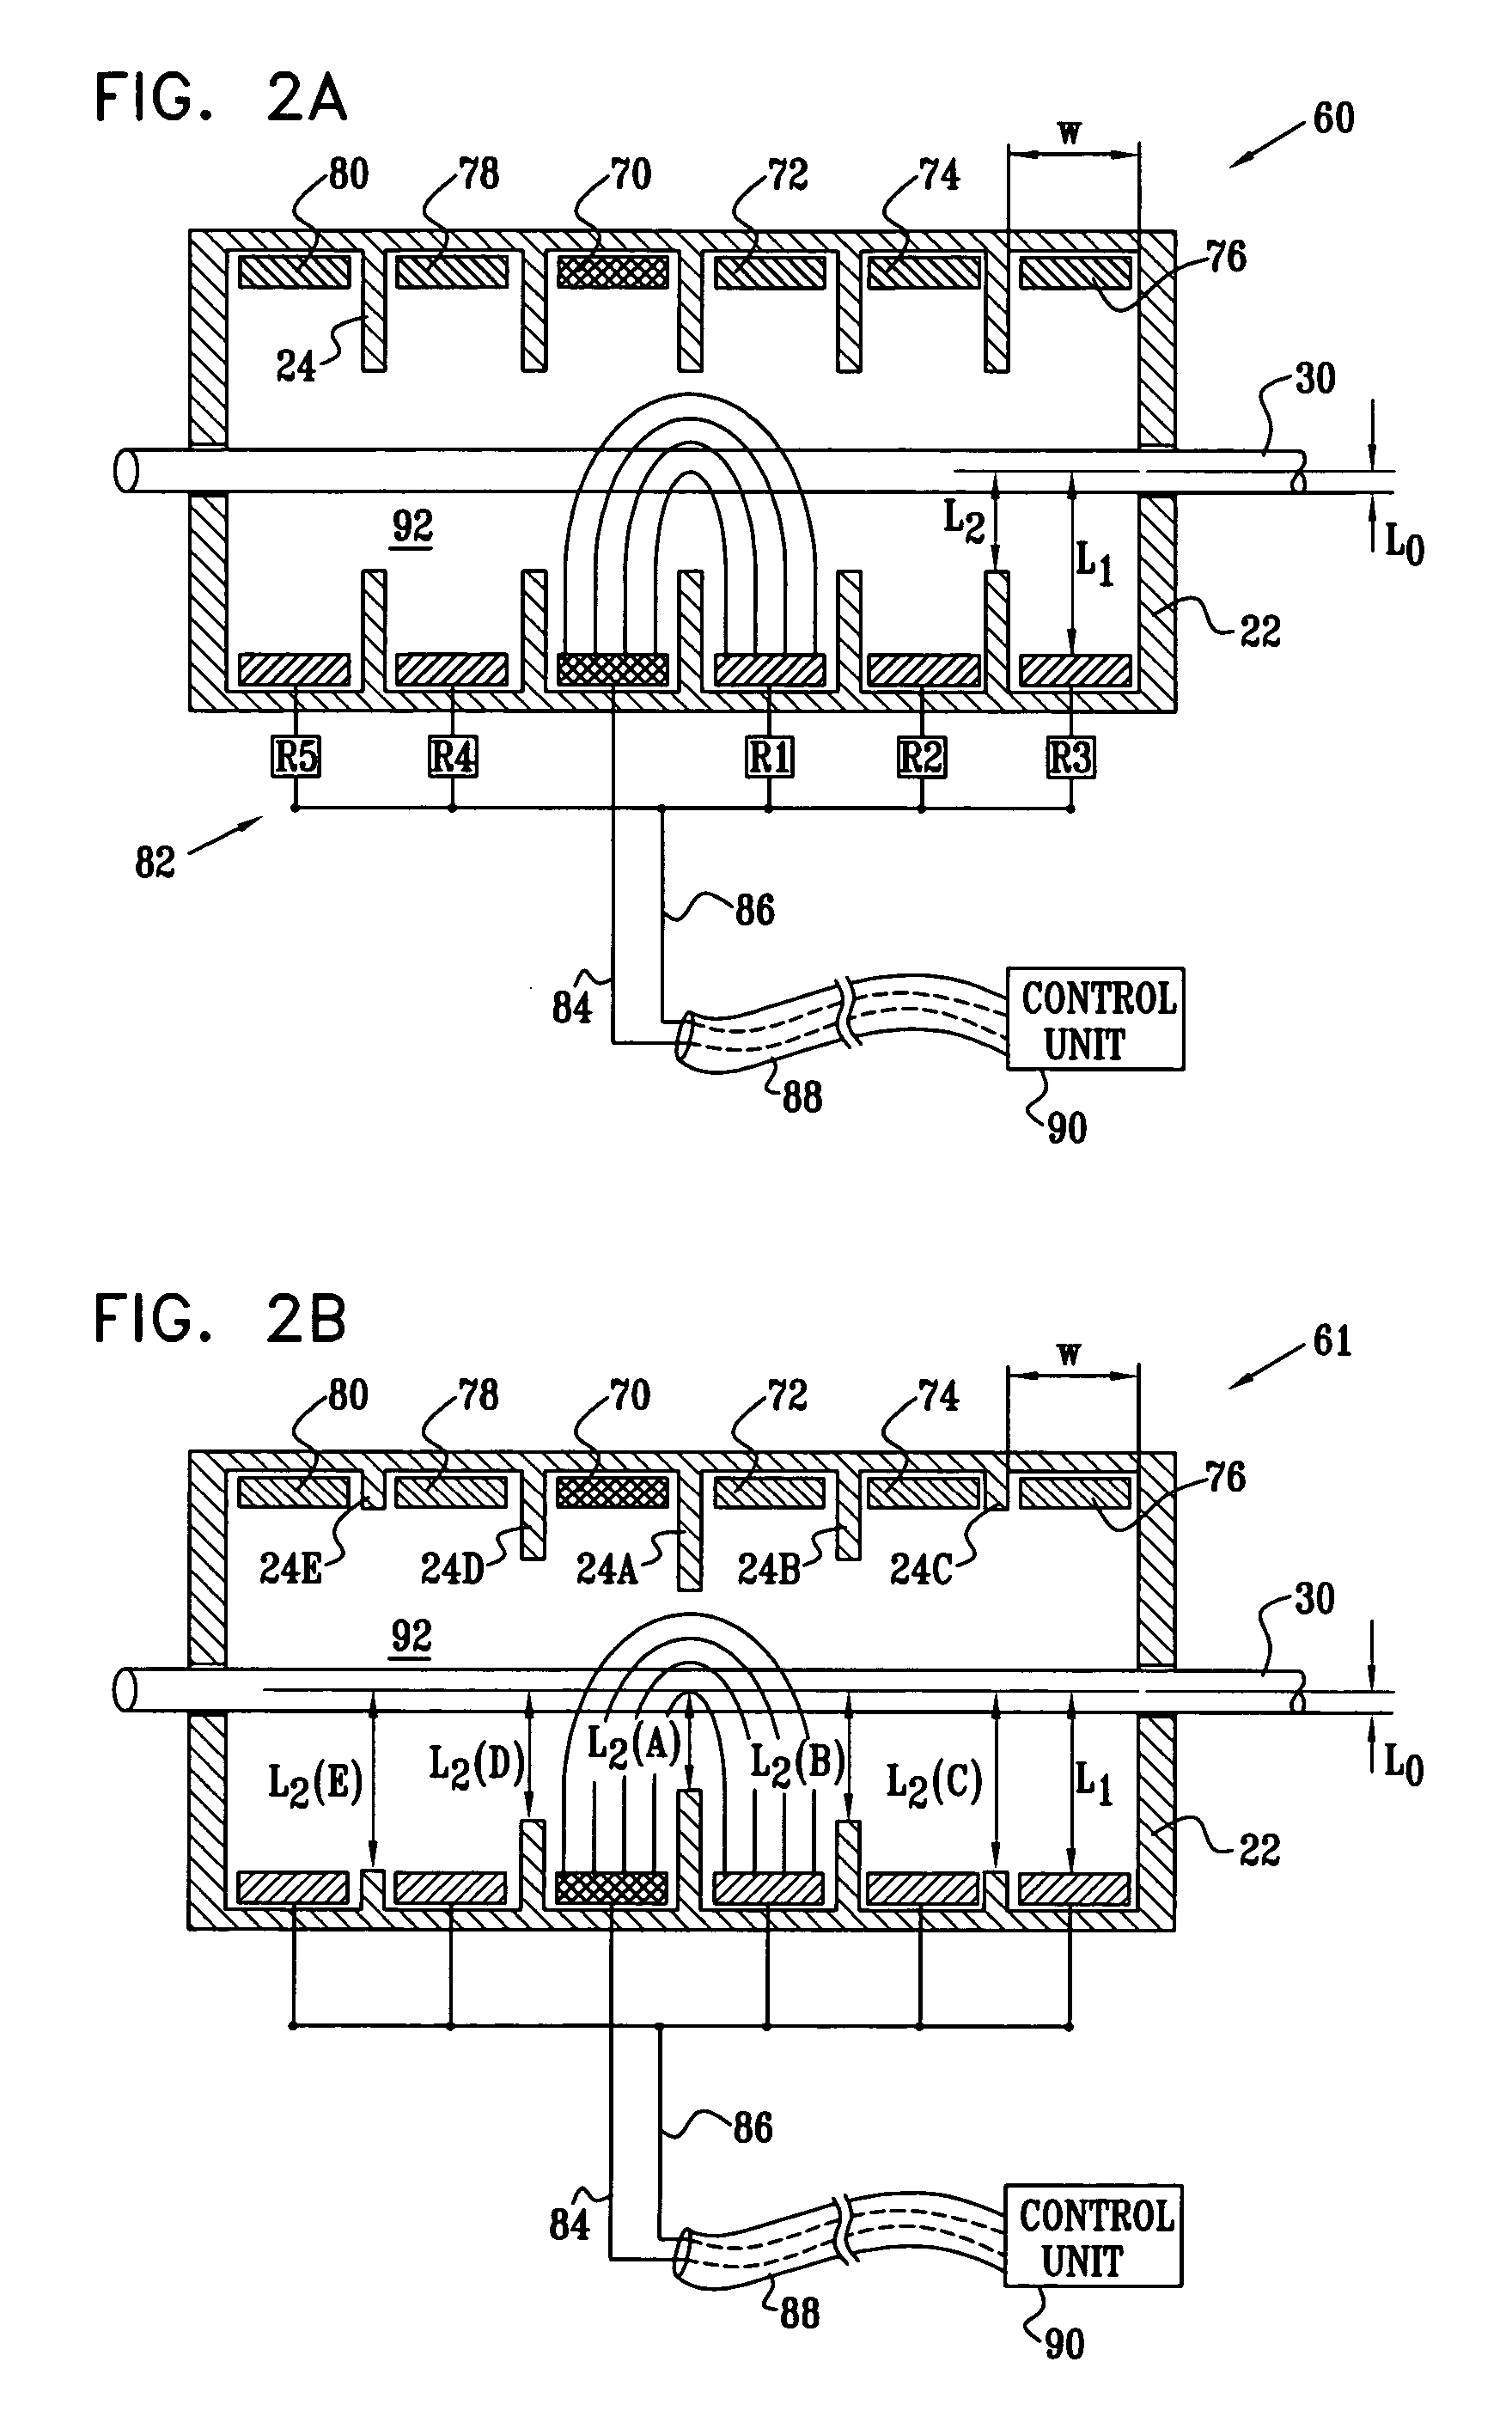 Construction of electrode assembly for nerve control